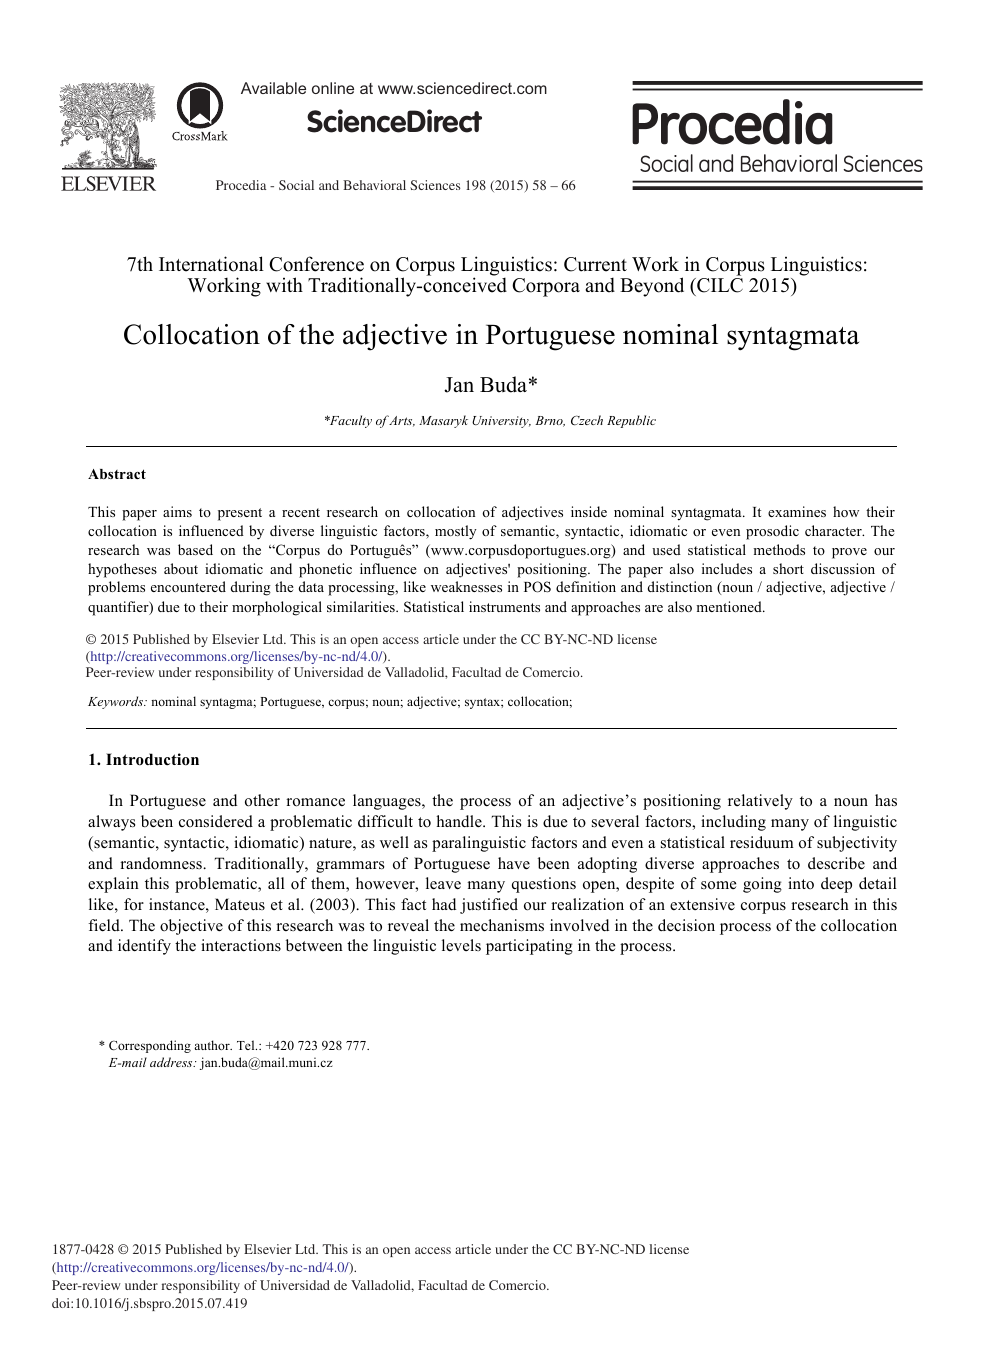 Collocation Of The Adjective In Portuguese Nominal Syntagmata Topic Of Research Paper In Languages And Literature Download Scholarly Article Pdf And Read For Free On Cyberleninka Open Science Hub